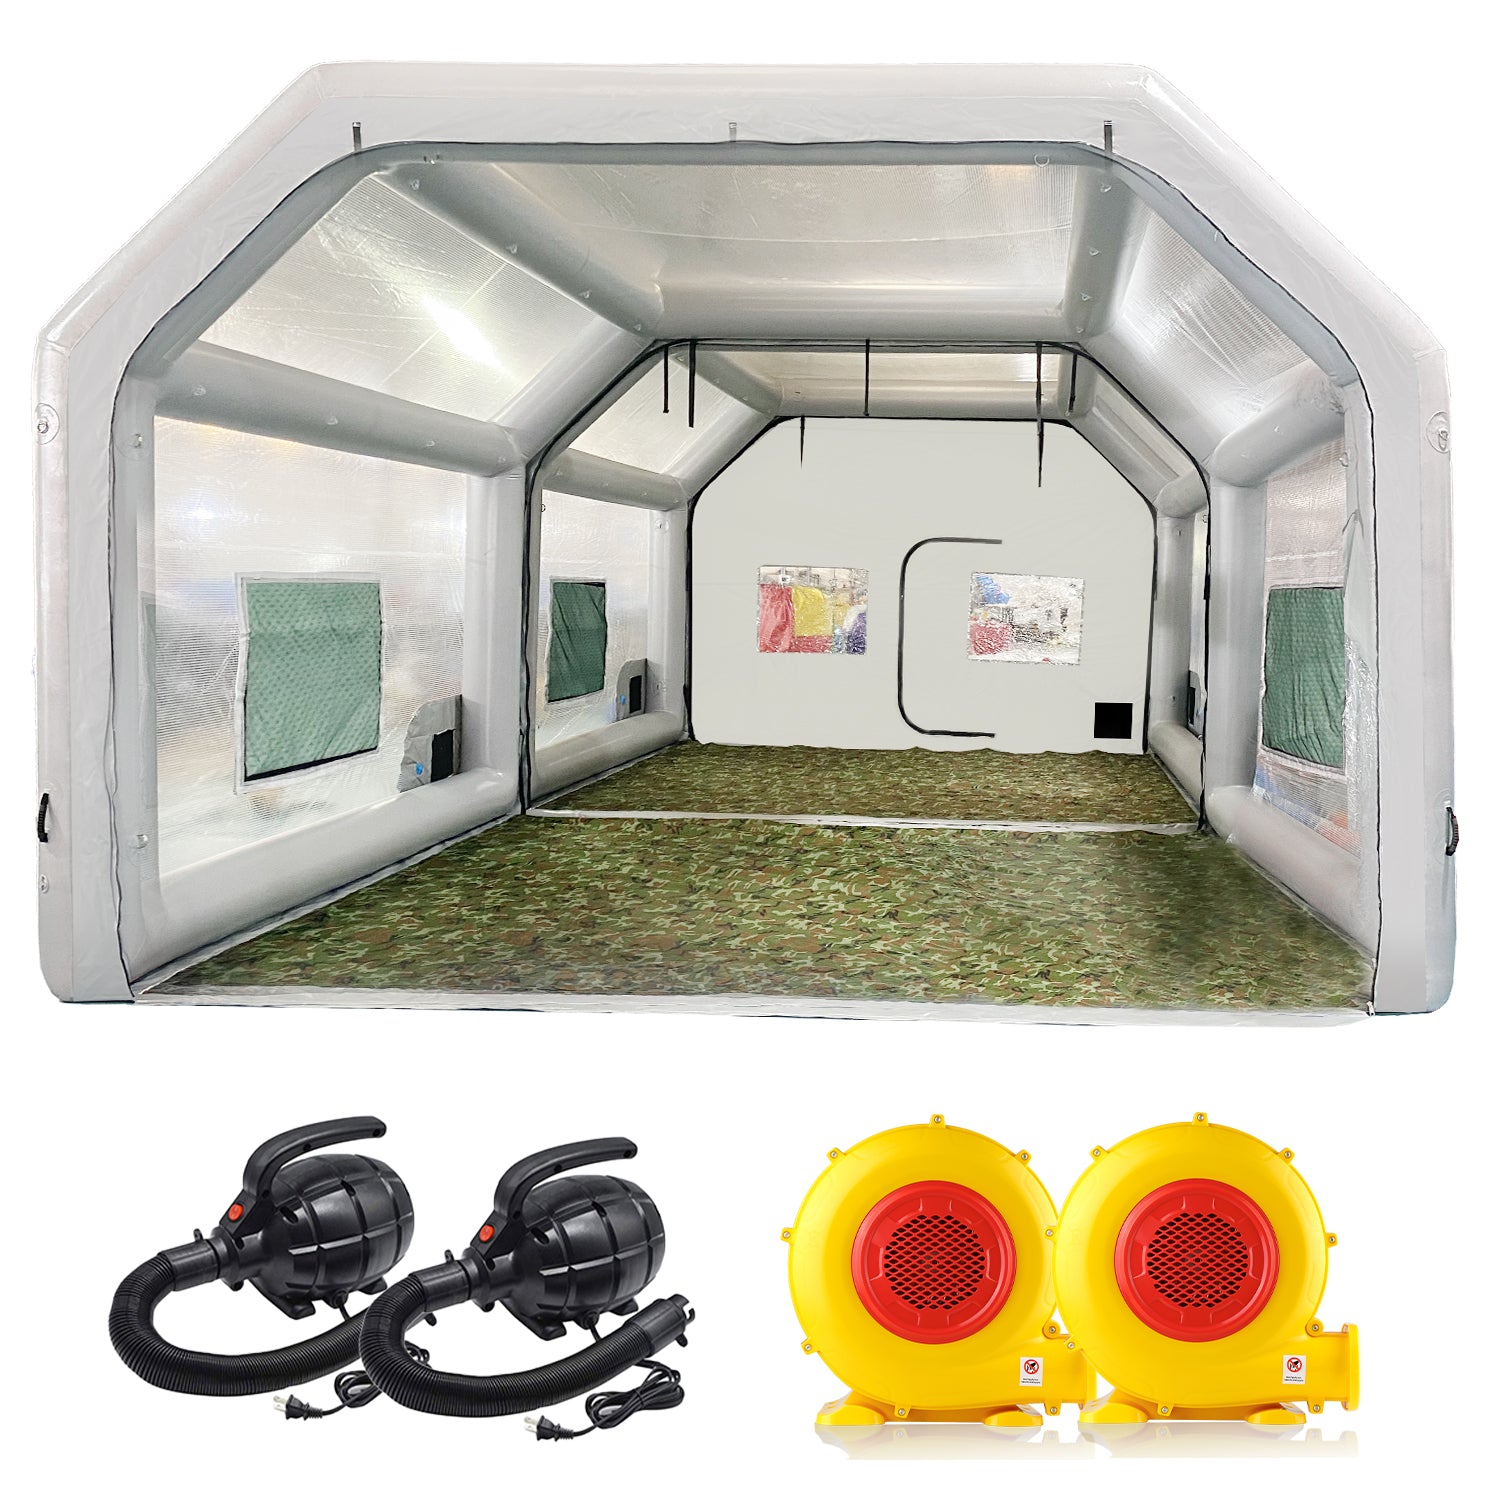 GORILLASPRO Inflatable Paint Booth 21X13X9Ft with 1100W Blower Upgrade Air Filter System More Durable Portable Spray Paint Tent